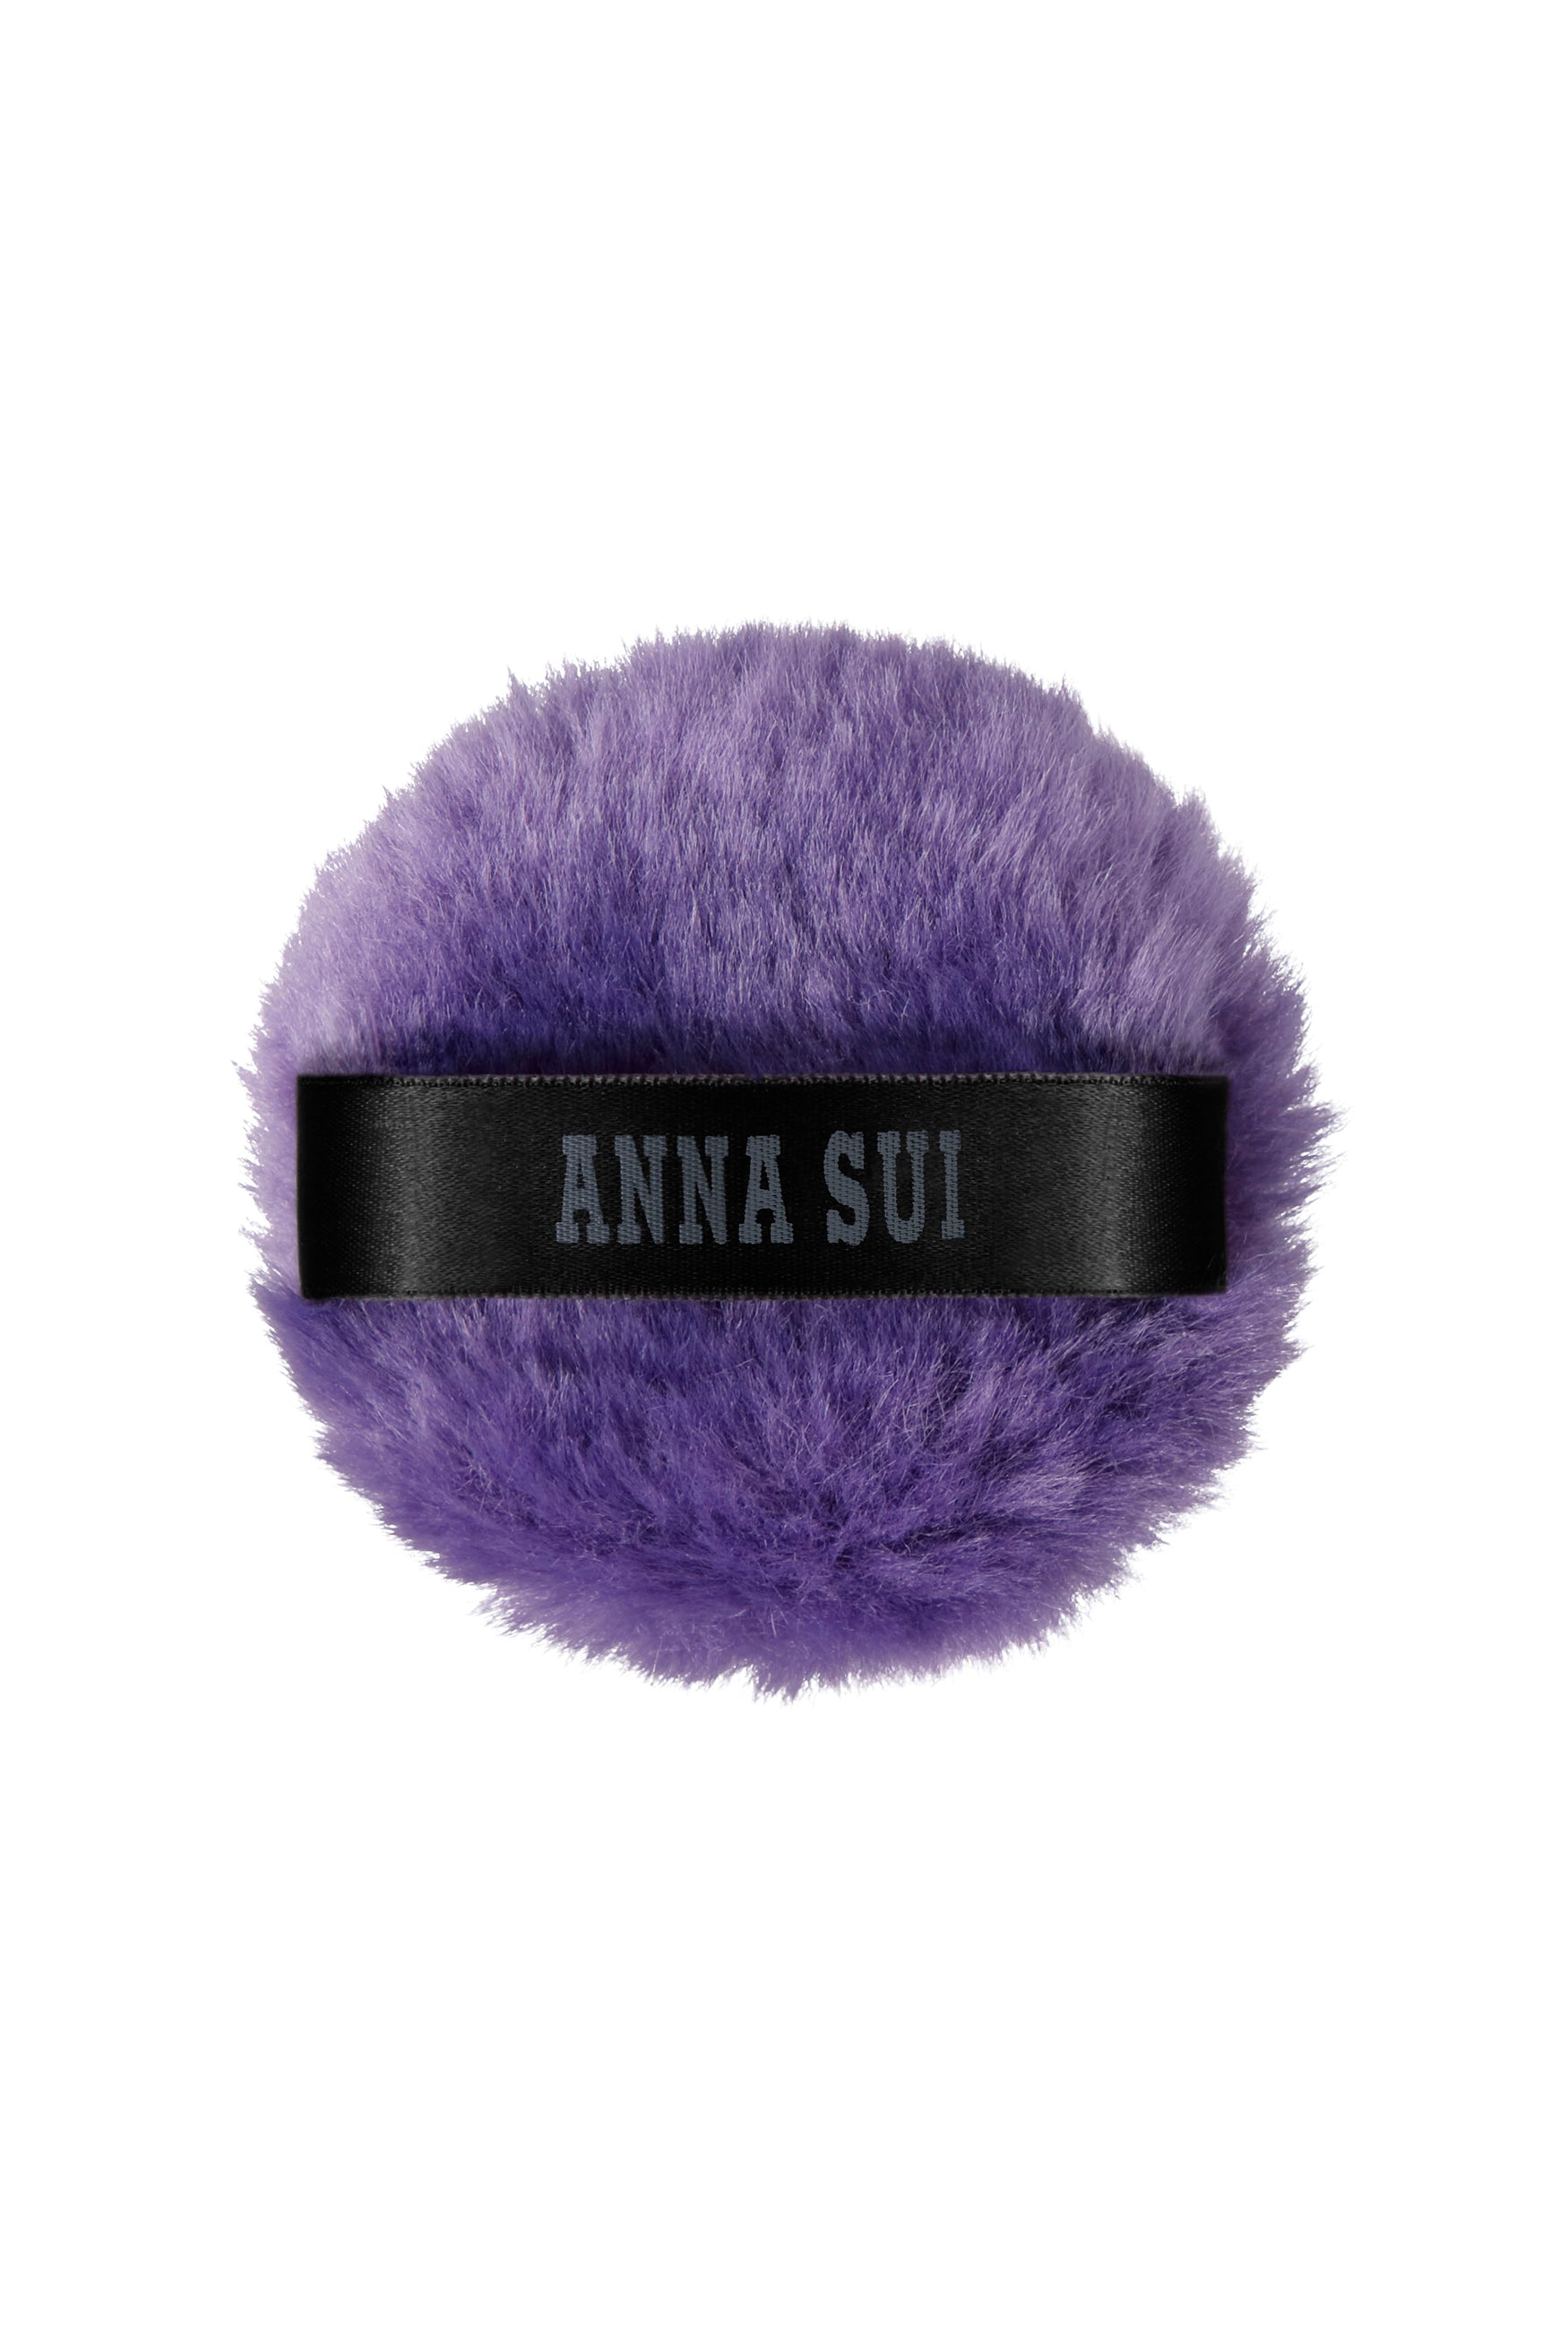 New: Loose Face Powder Puff – Anna Sui